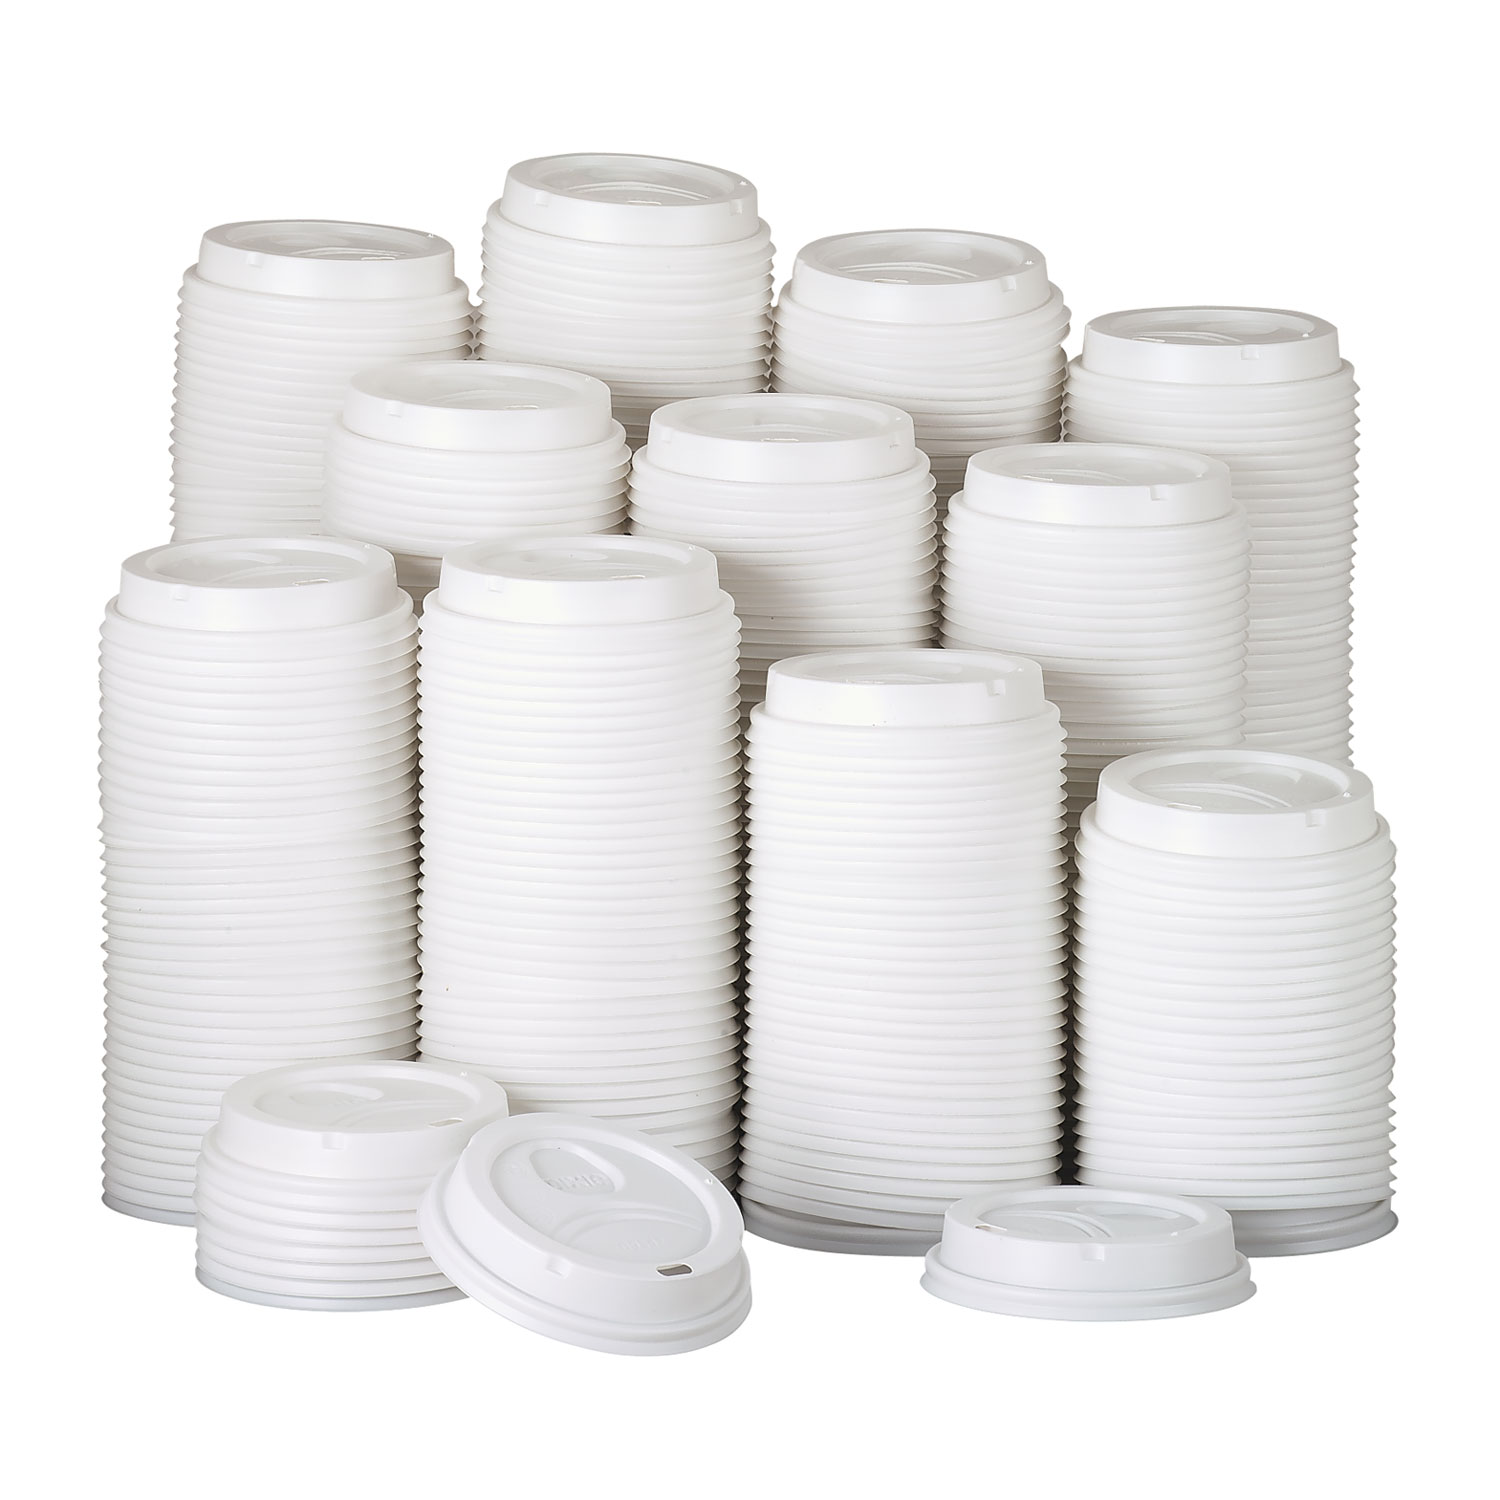 White Dome Lid Fits 10-16oz Perfectouch Cups, 12-20oz Hot Cups, WiseSize, 500/CT